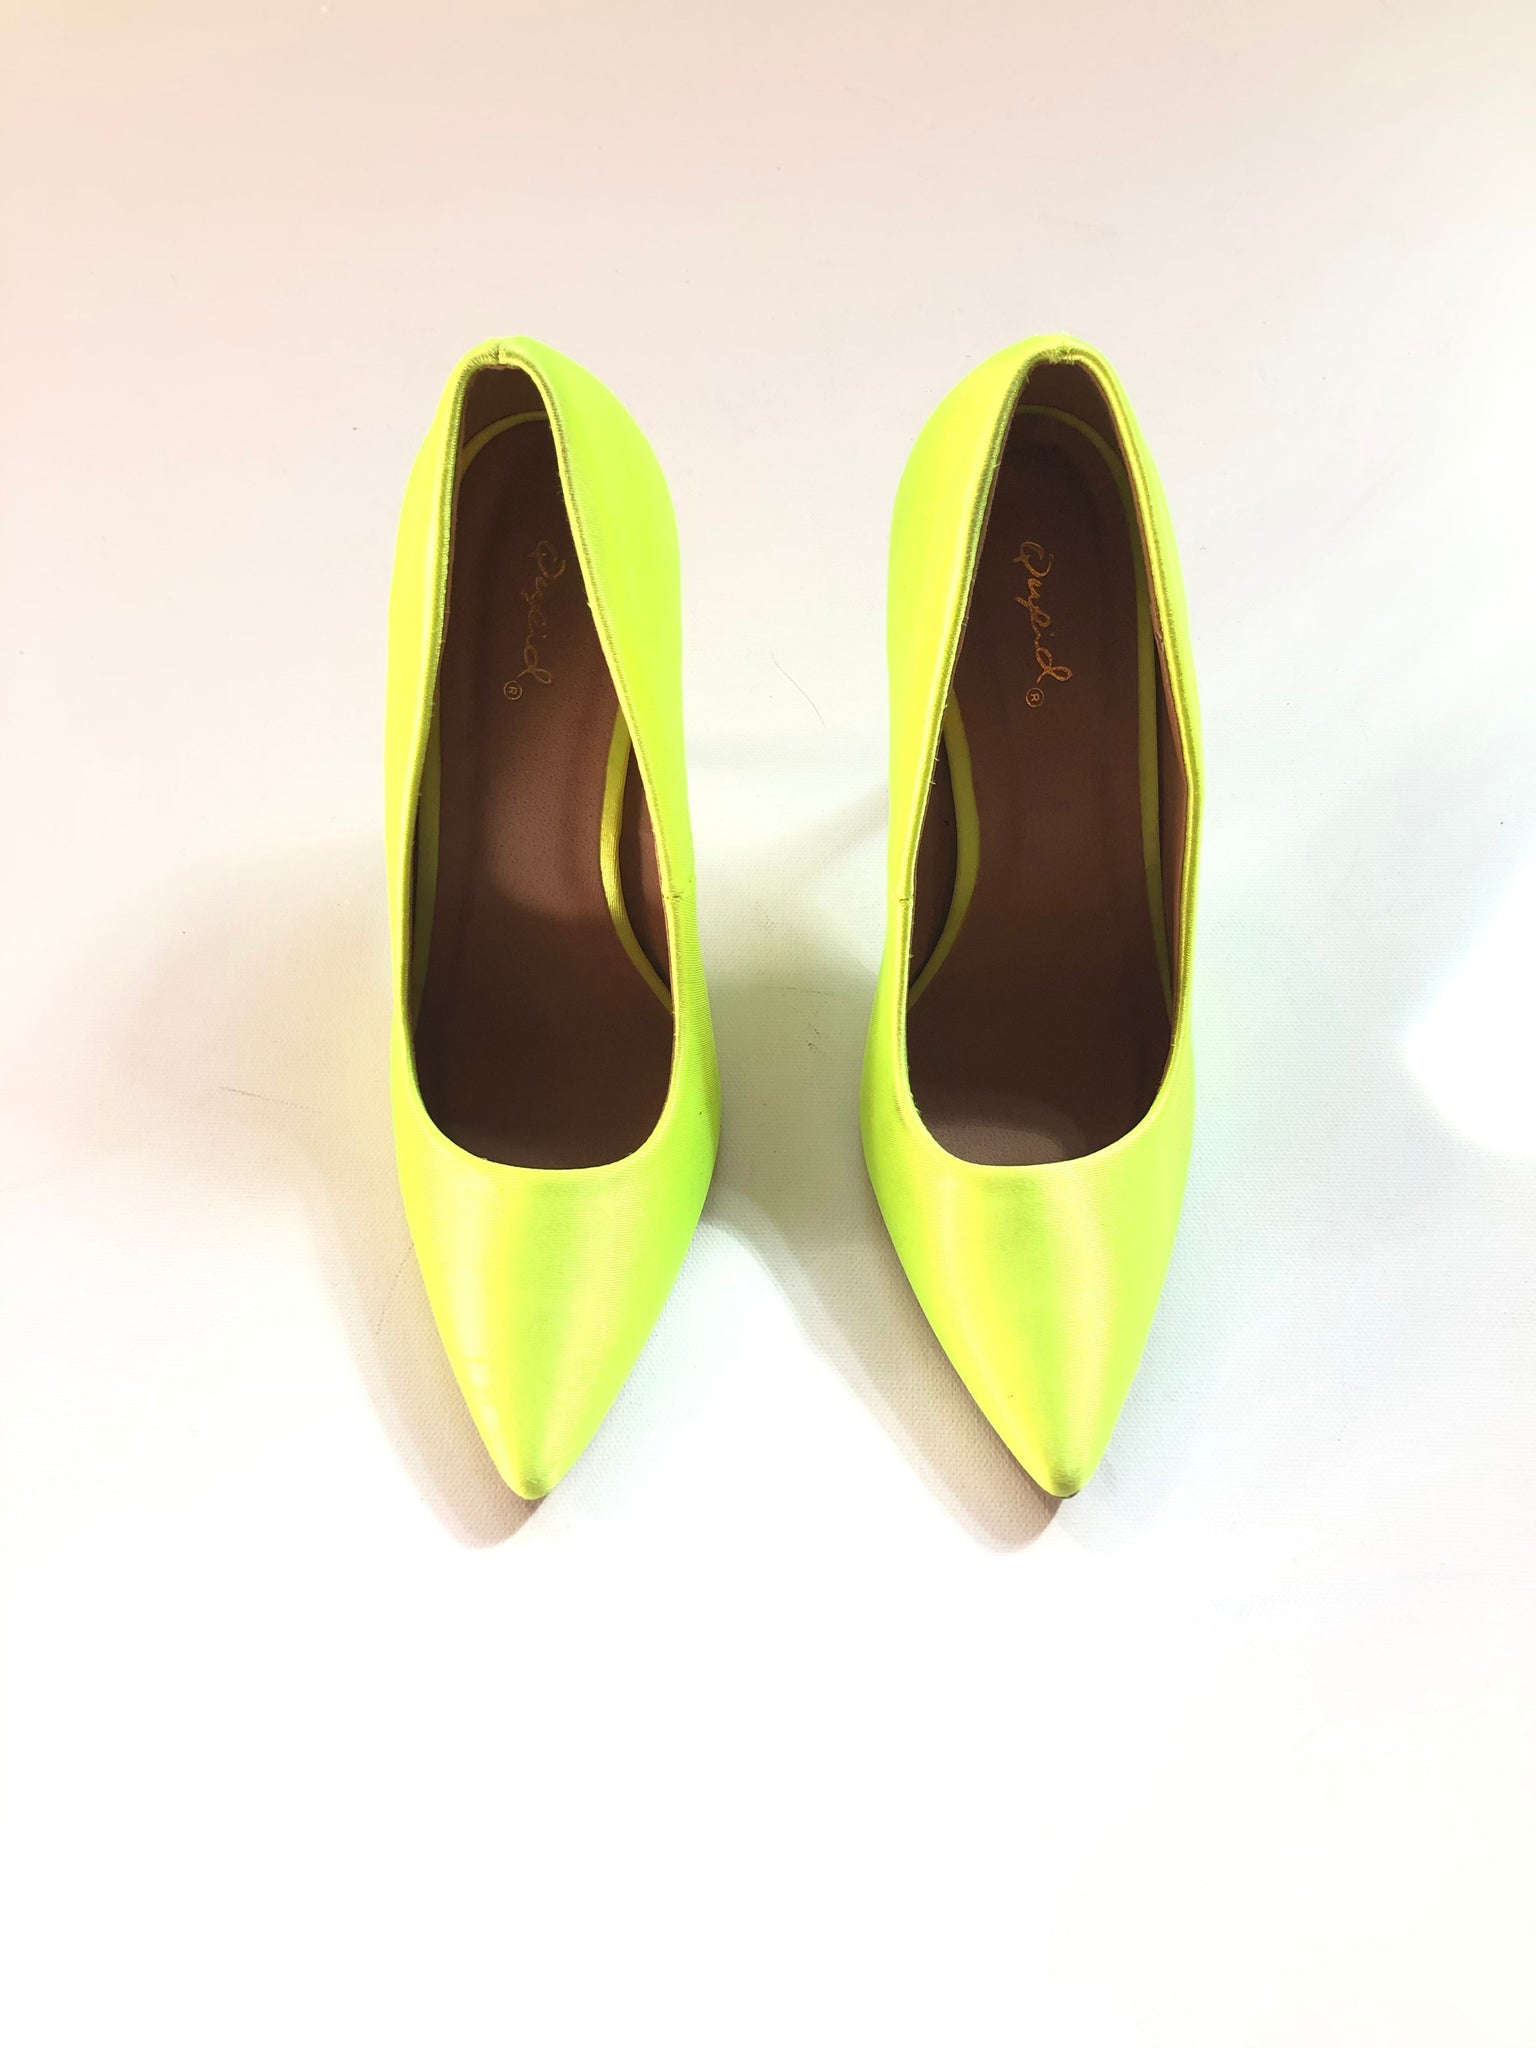 Veowalk Solid Yellow Green Patent Women Pointed Toe Stiletto Pumps Ladies  Wedding Party High Heel Shoes Small Size 33 44 45 - Pumps - AliExpress